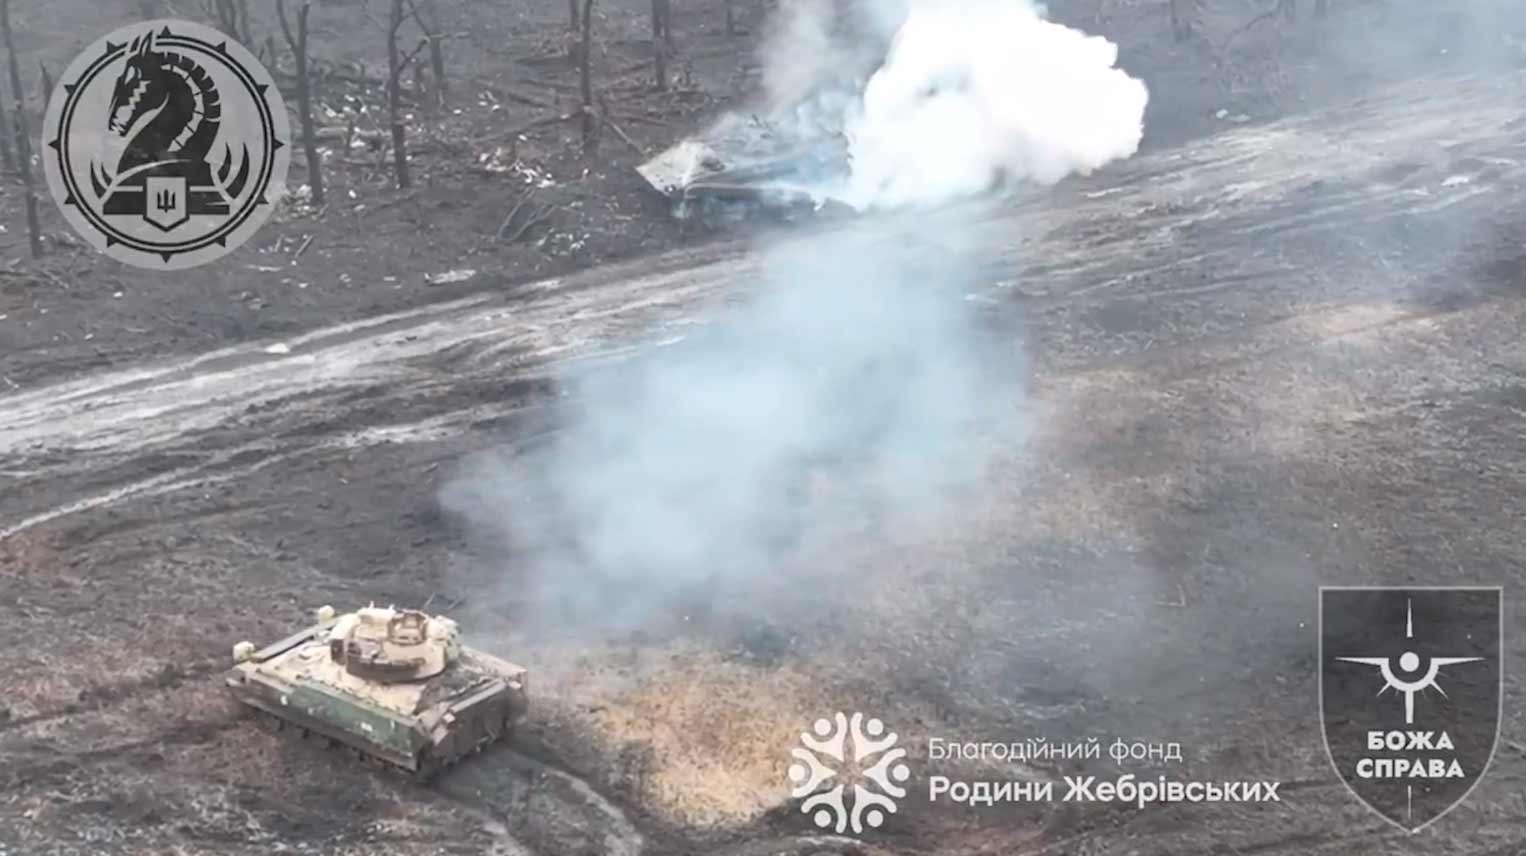 Video shows American Bradley IFV armored vehicle in action on the front line of Avdiivka